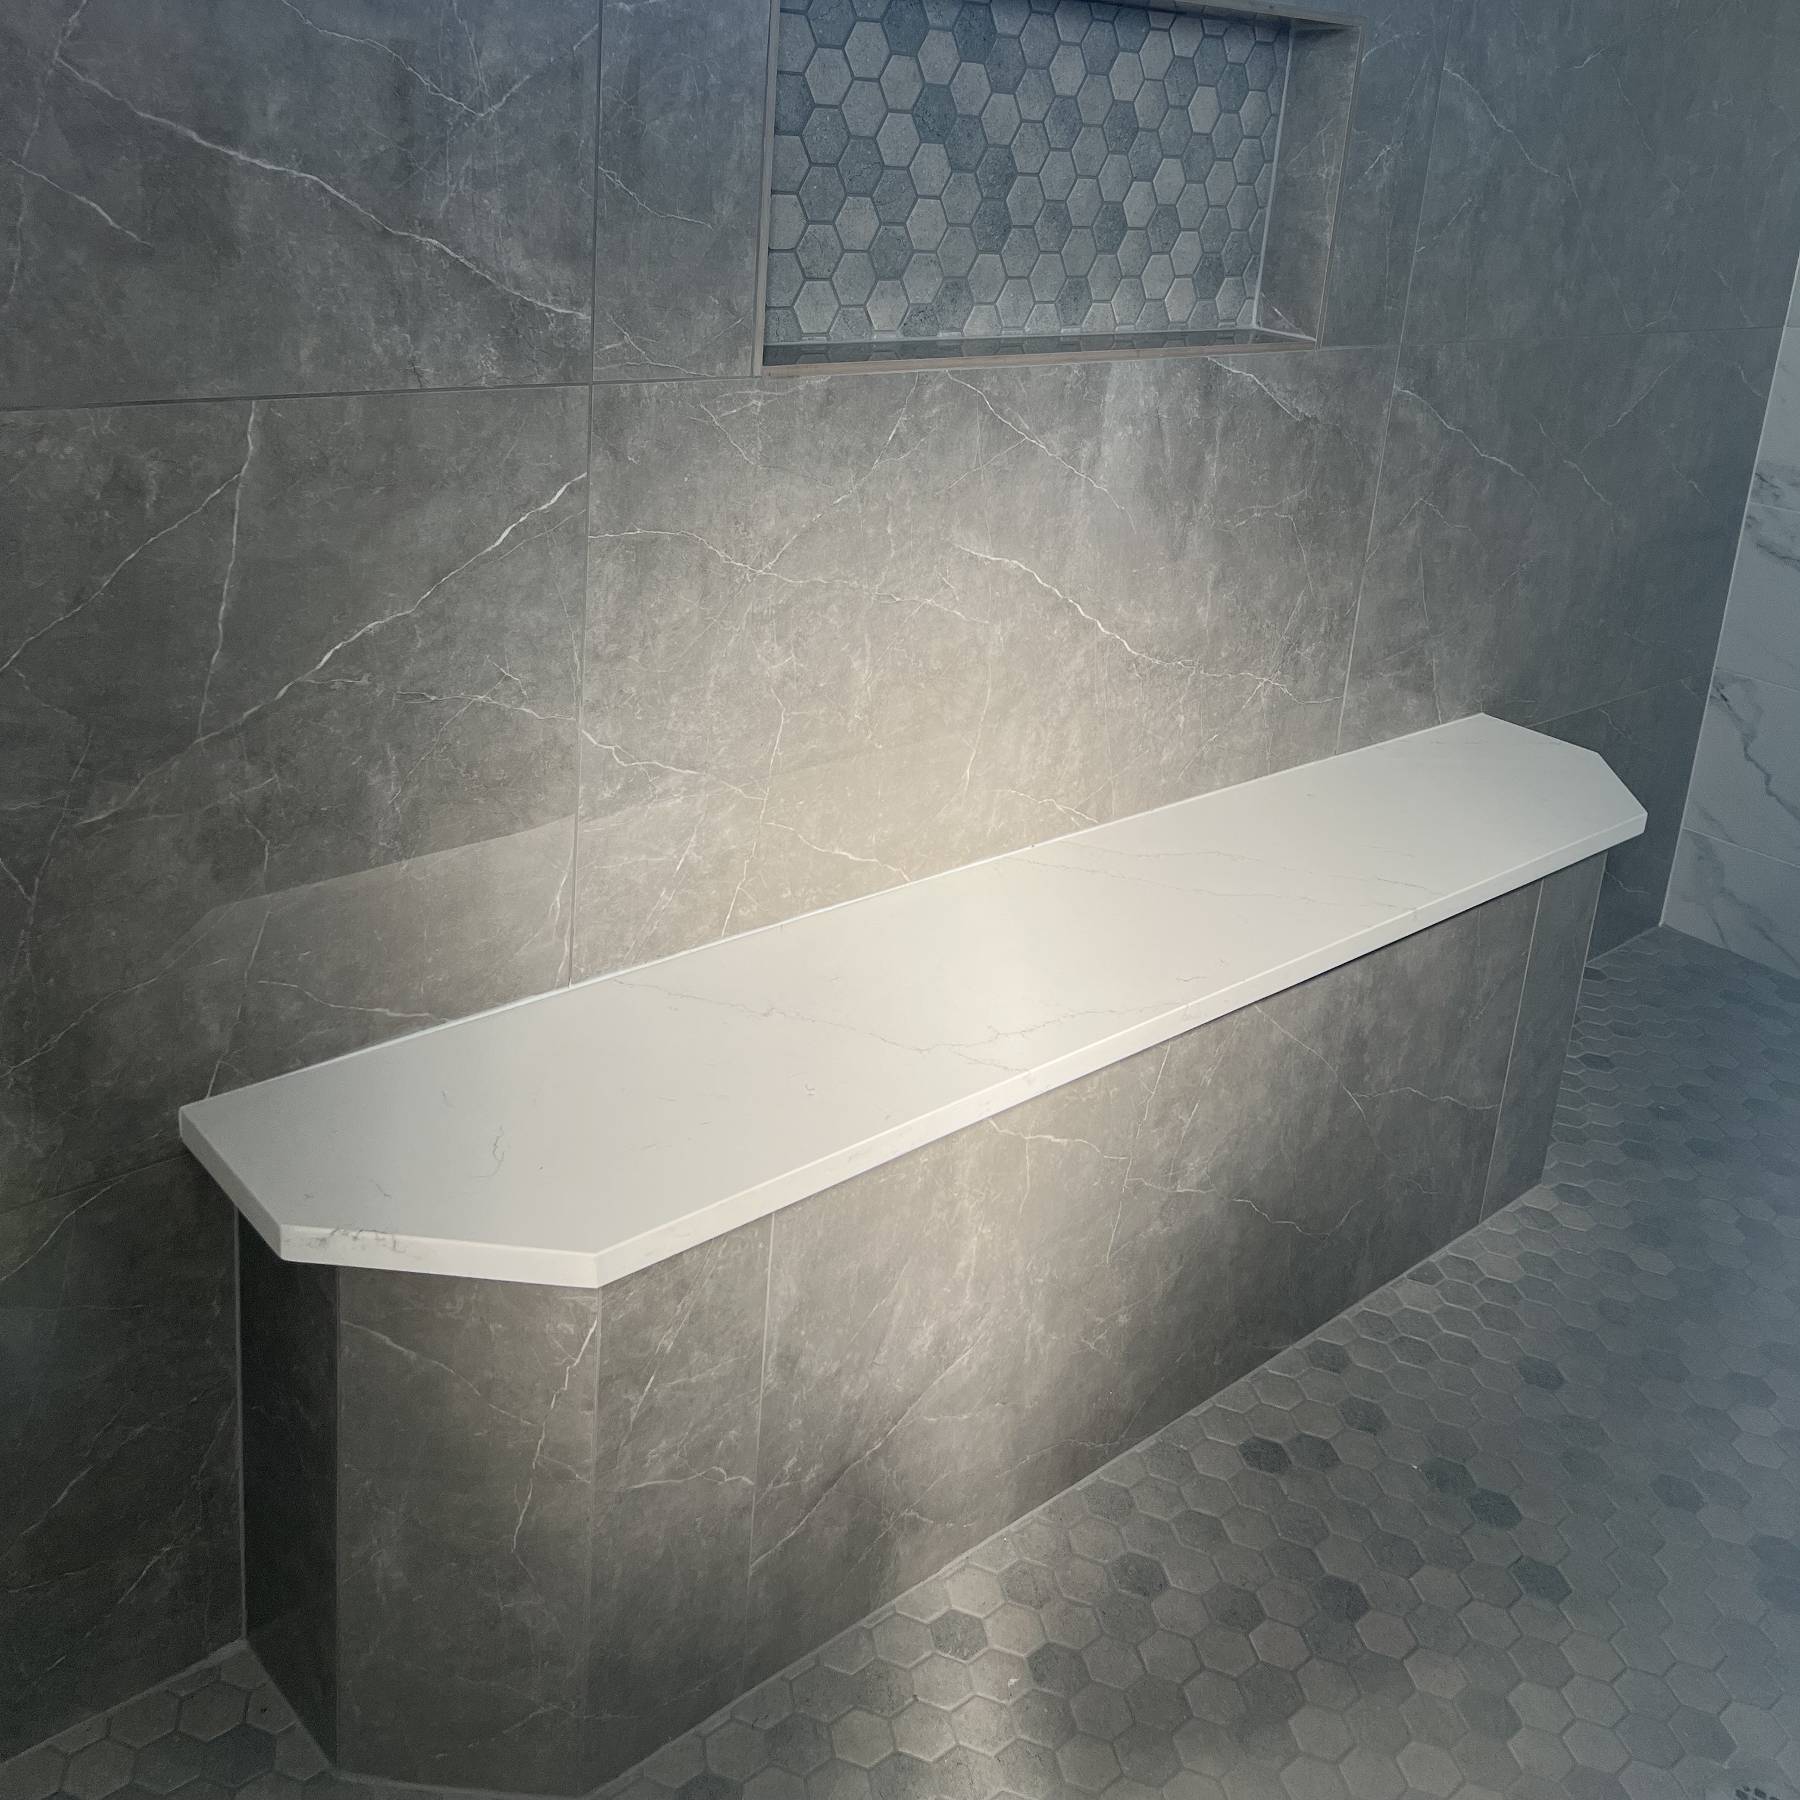 Built-in bench and recessed shower shelf in a large, gray-tiled shower.